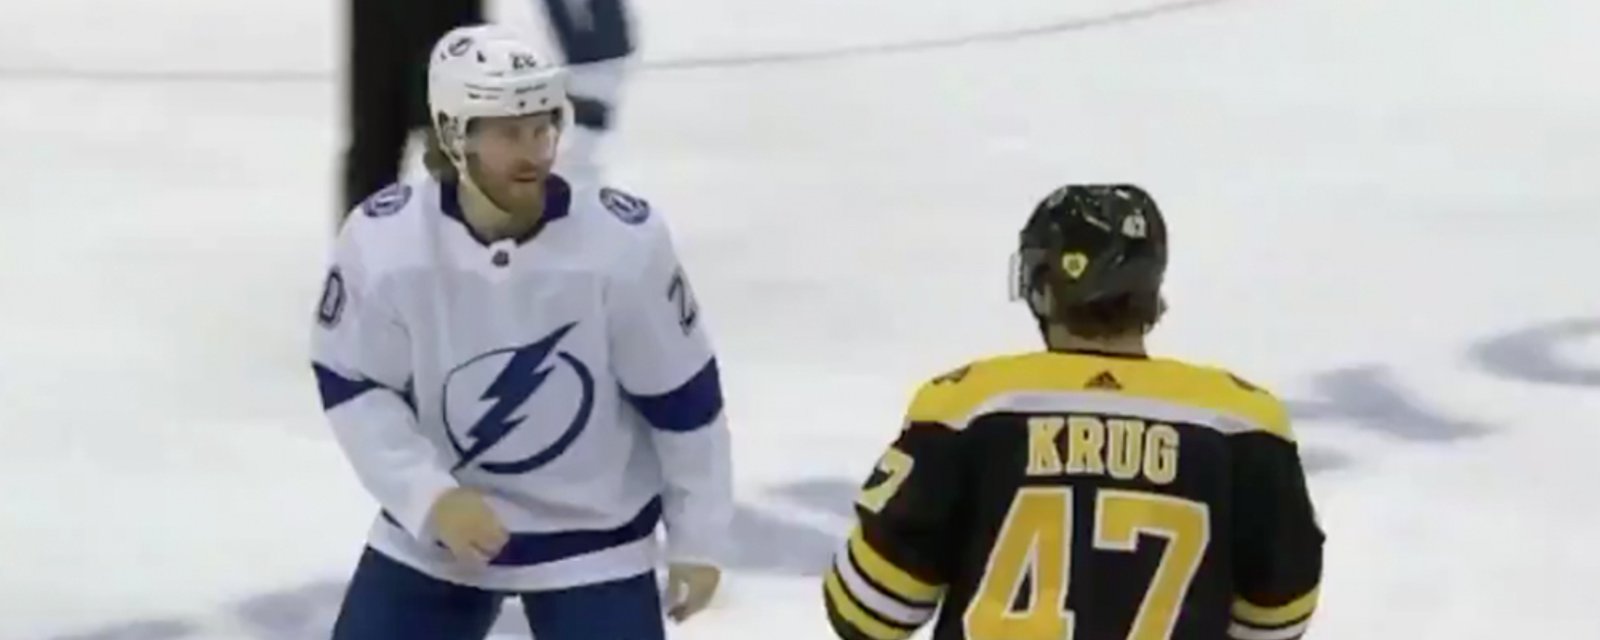 Krug drops the gloves after dirty hit on teammate Carlo